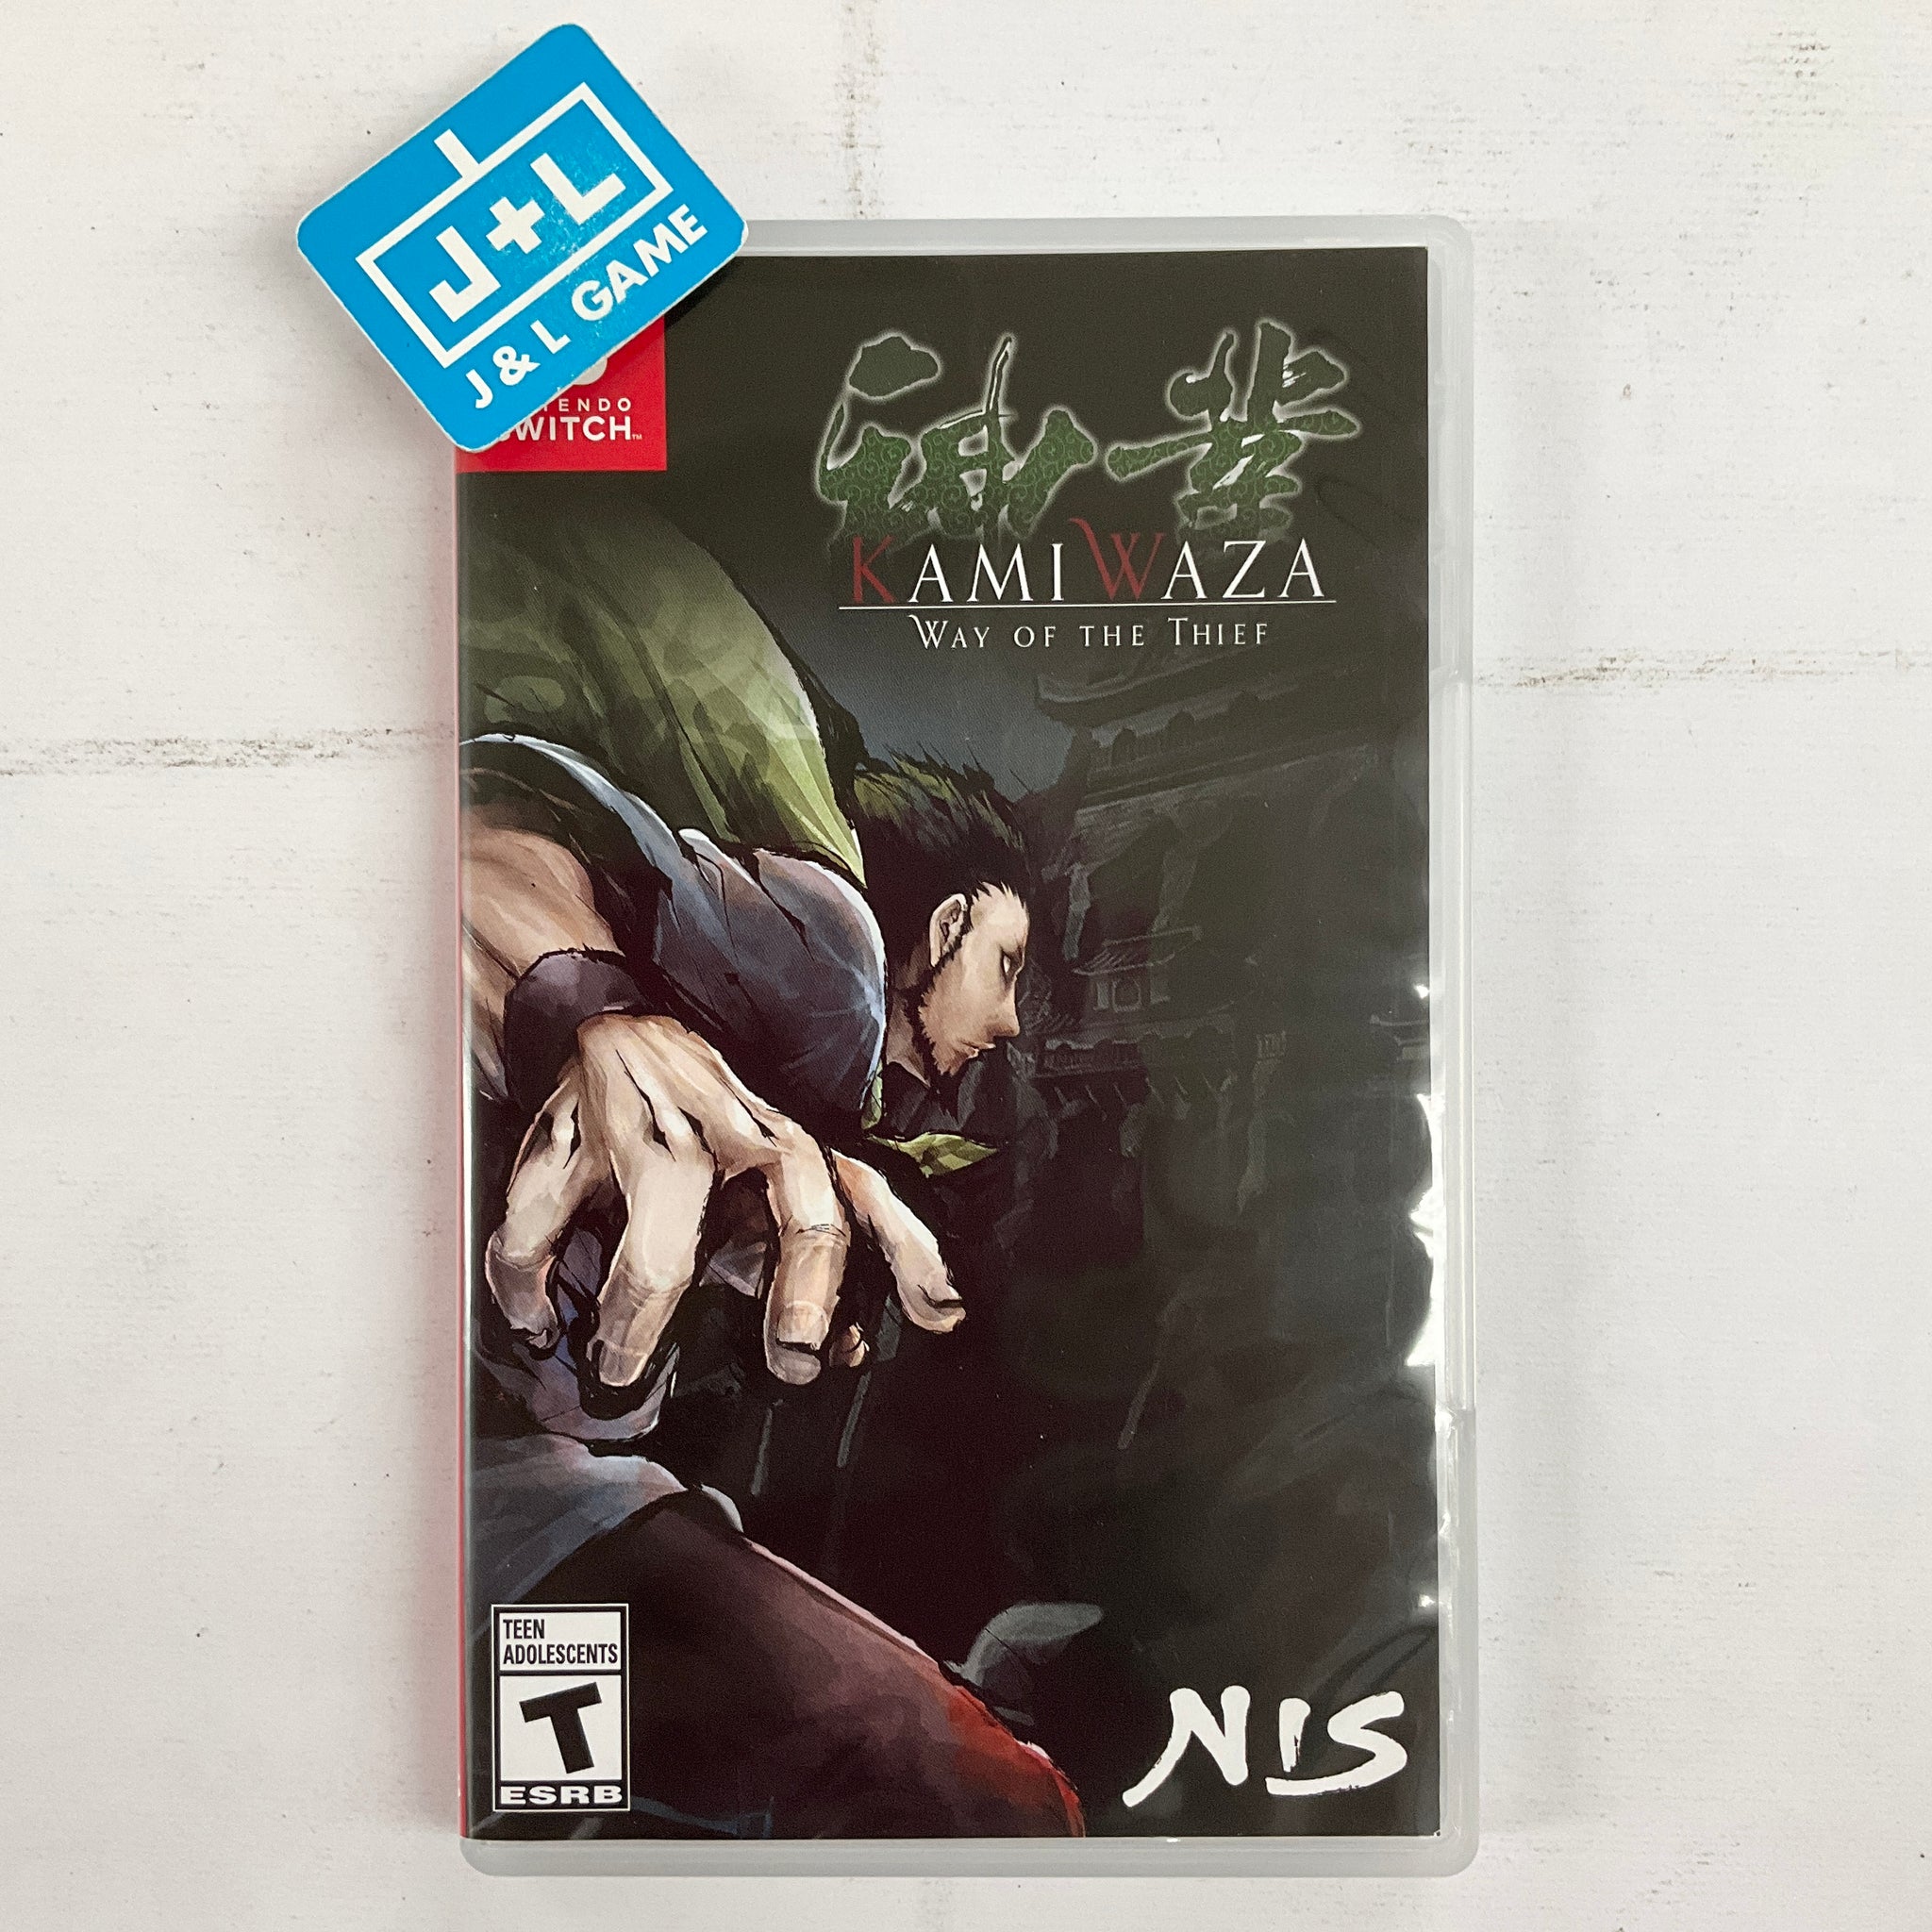 Kamiwaza: Way of the Thief - (NSW) Nintendo Switch [UNBOXING] Video Games NIS America   